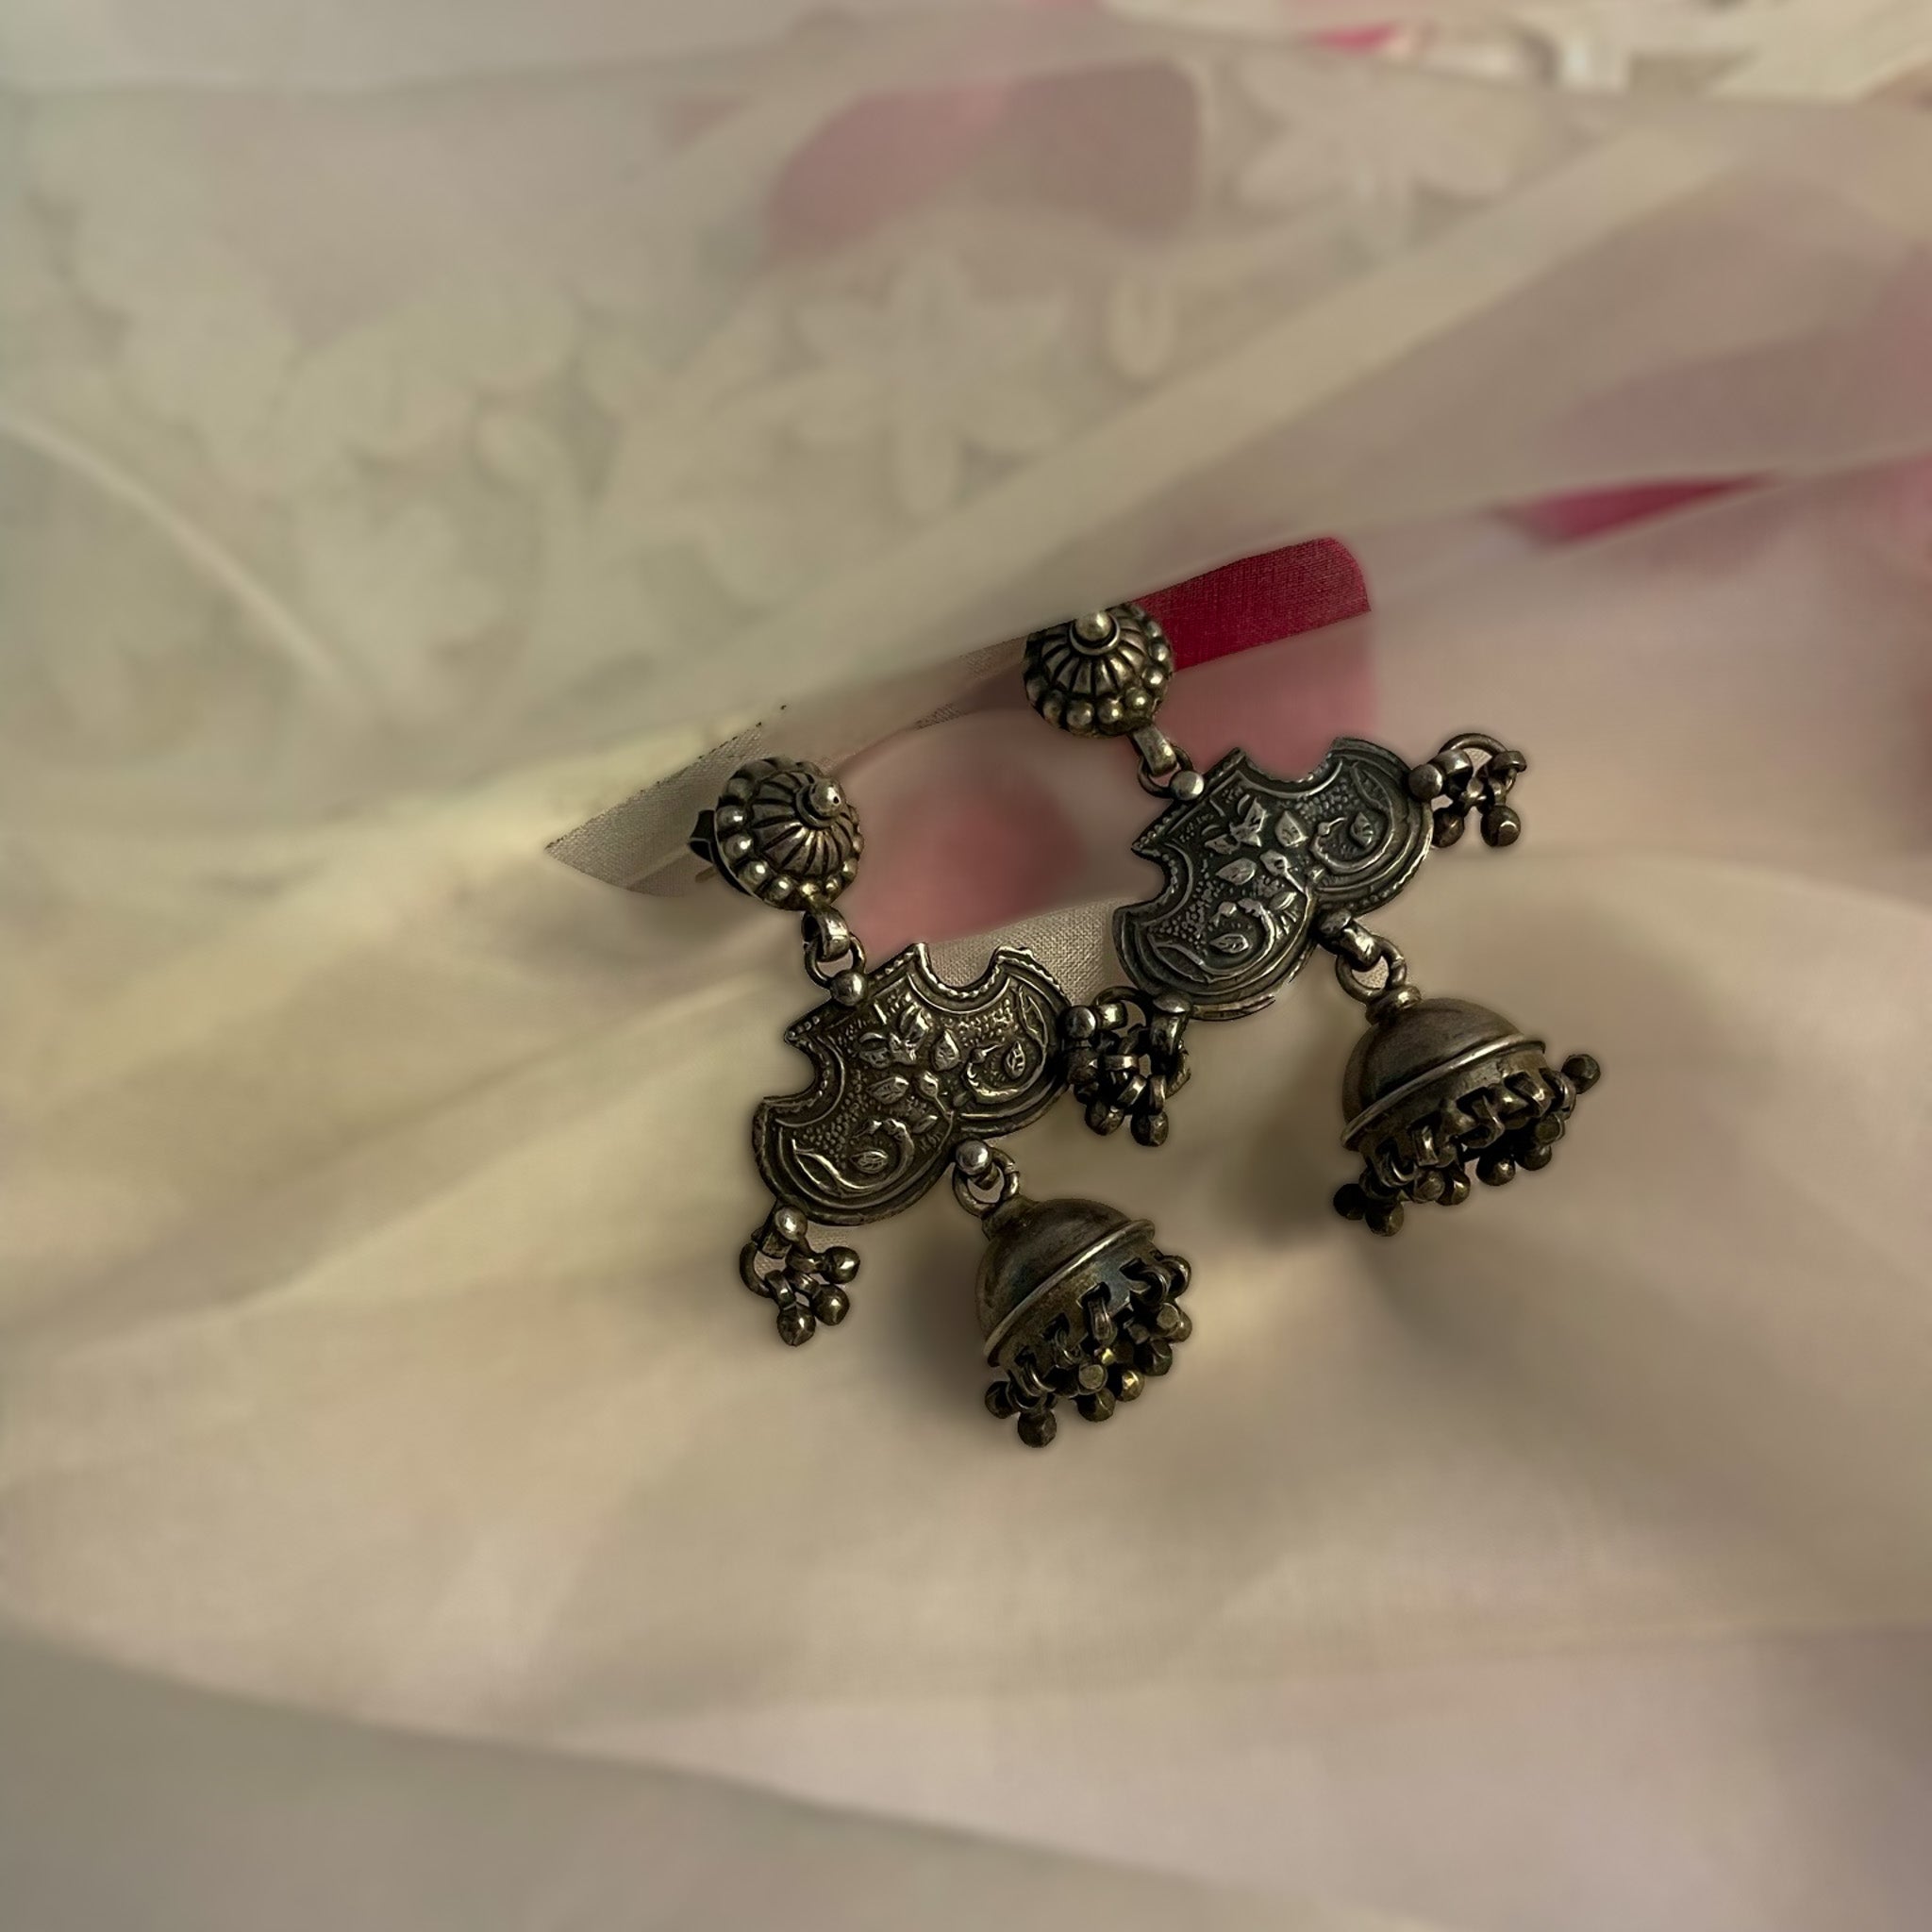 Details more than 212 small oxidised earrings best